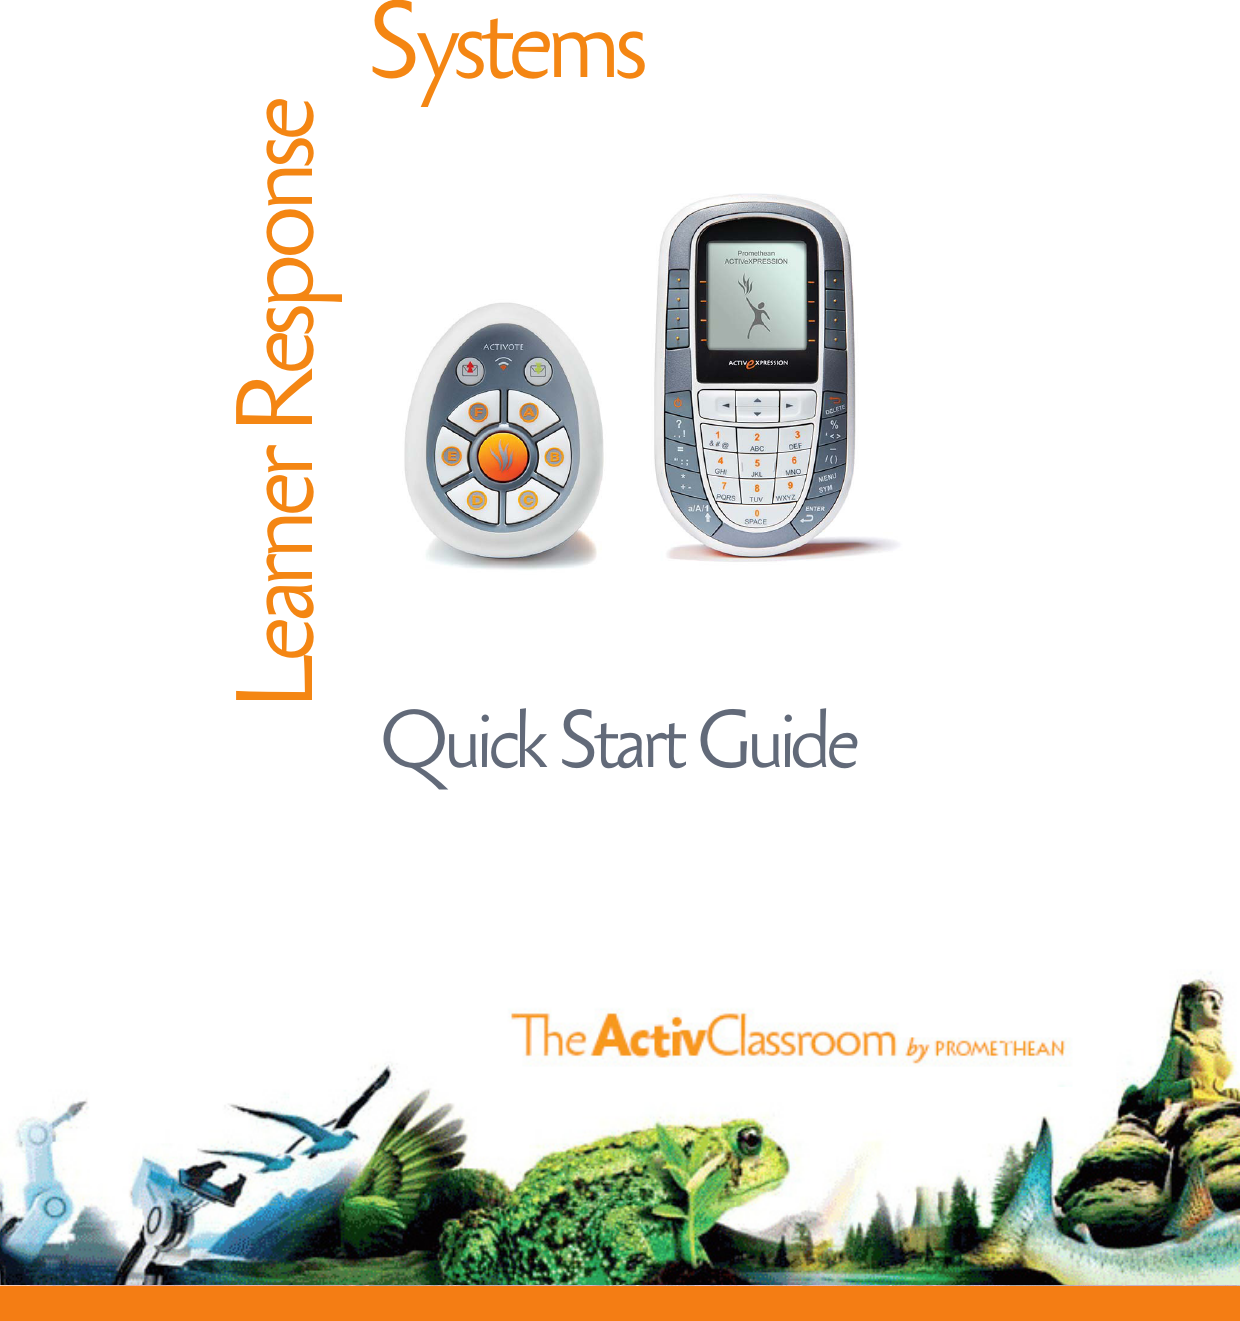   Quick Start GuideLearner Response SystemsQuick Start GuideLearner ResponseSystems